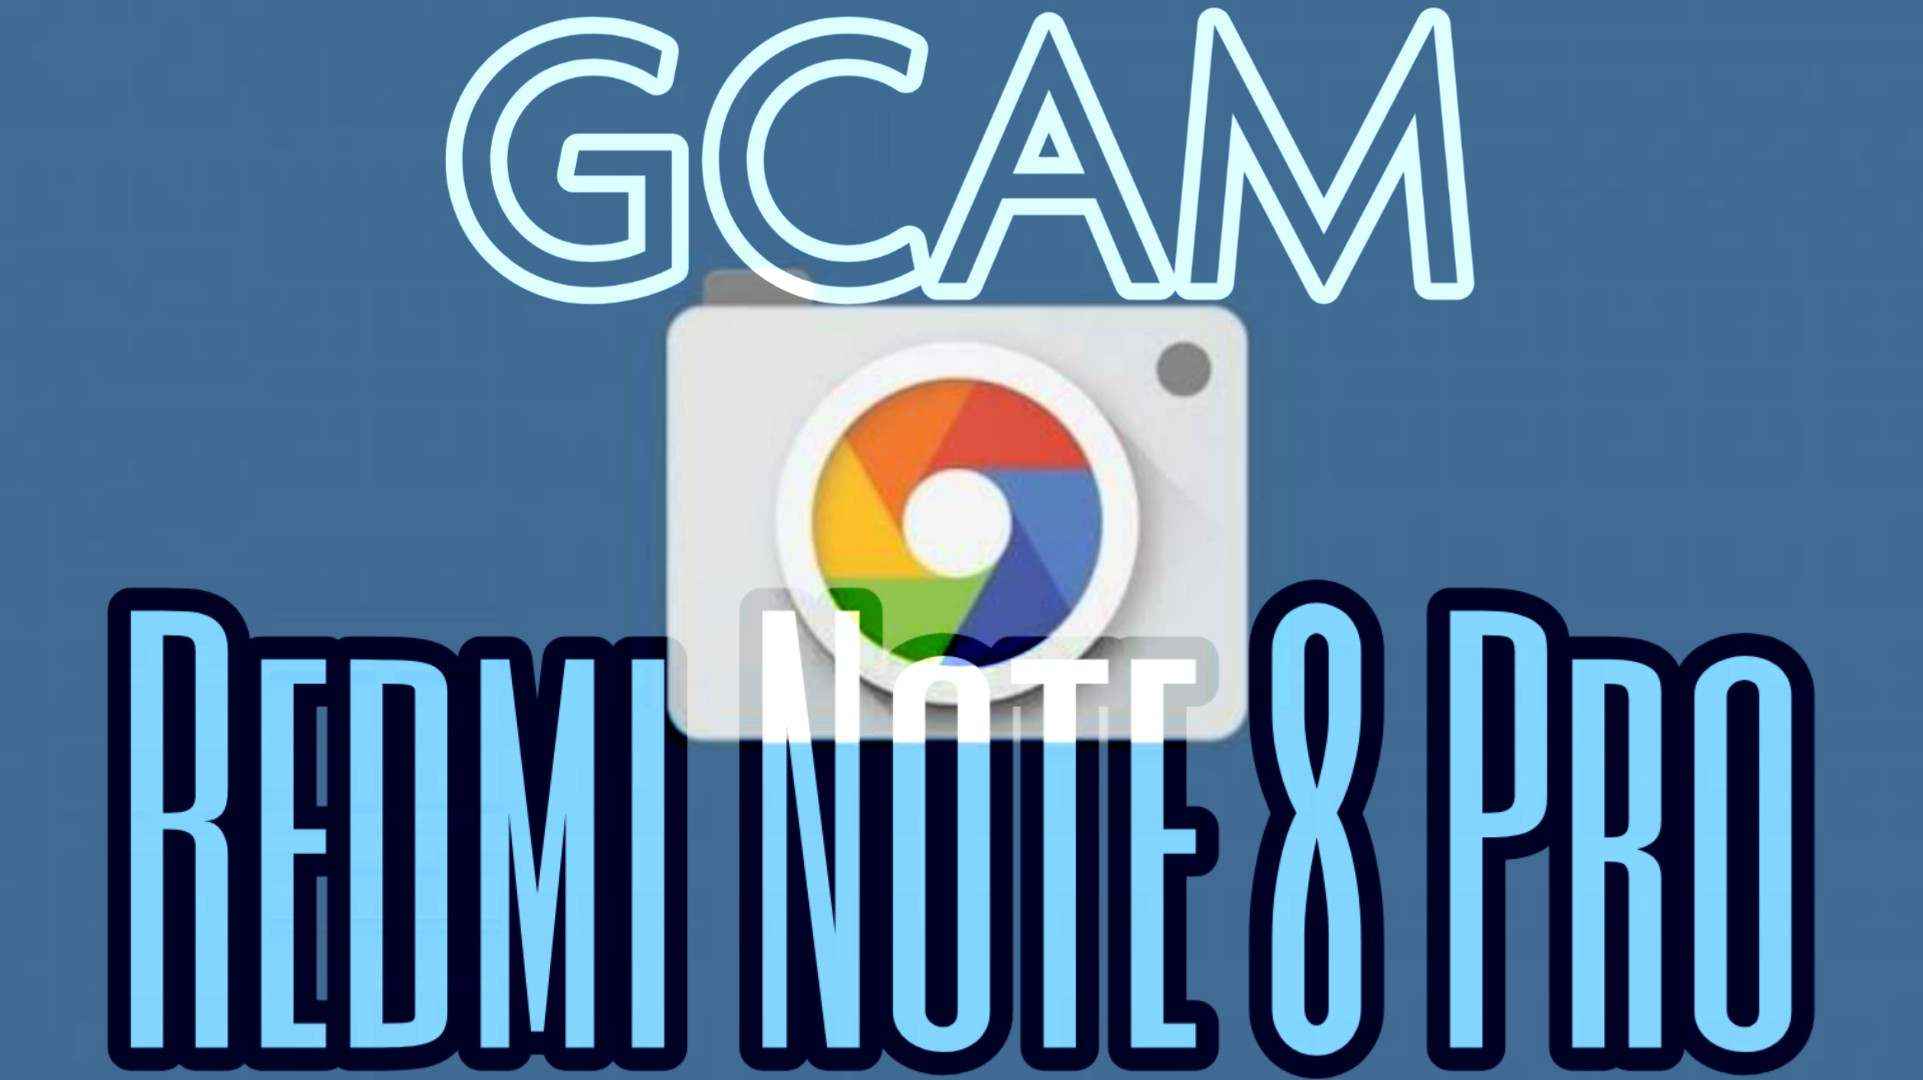 How to Download Stable GCAM 6.1 for Redmi Note 8 Pro [APK]